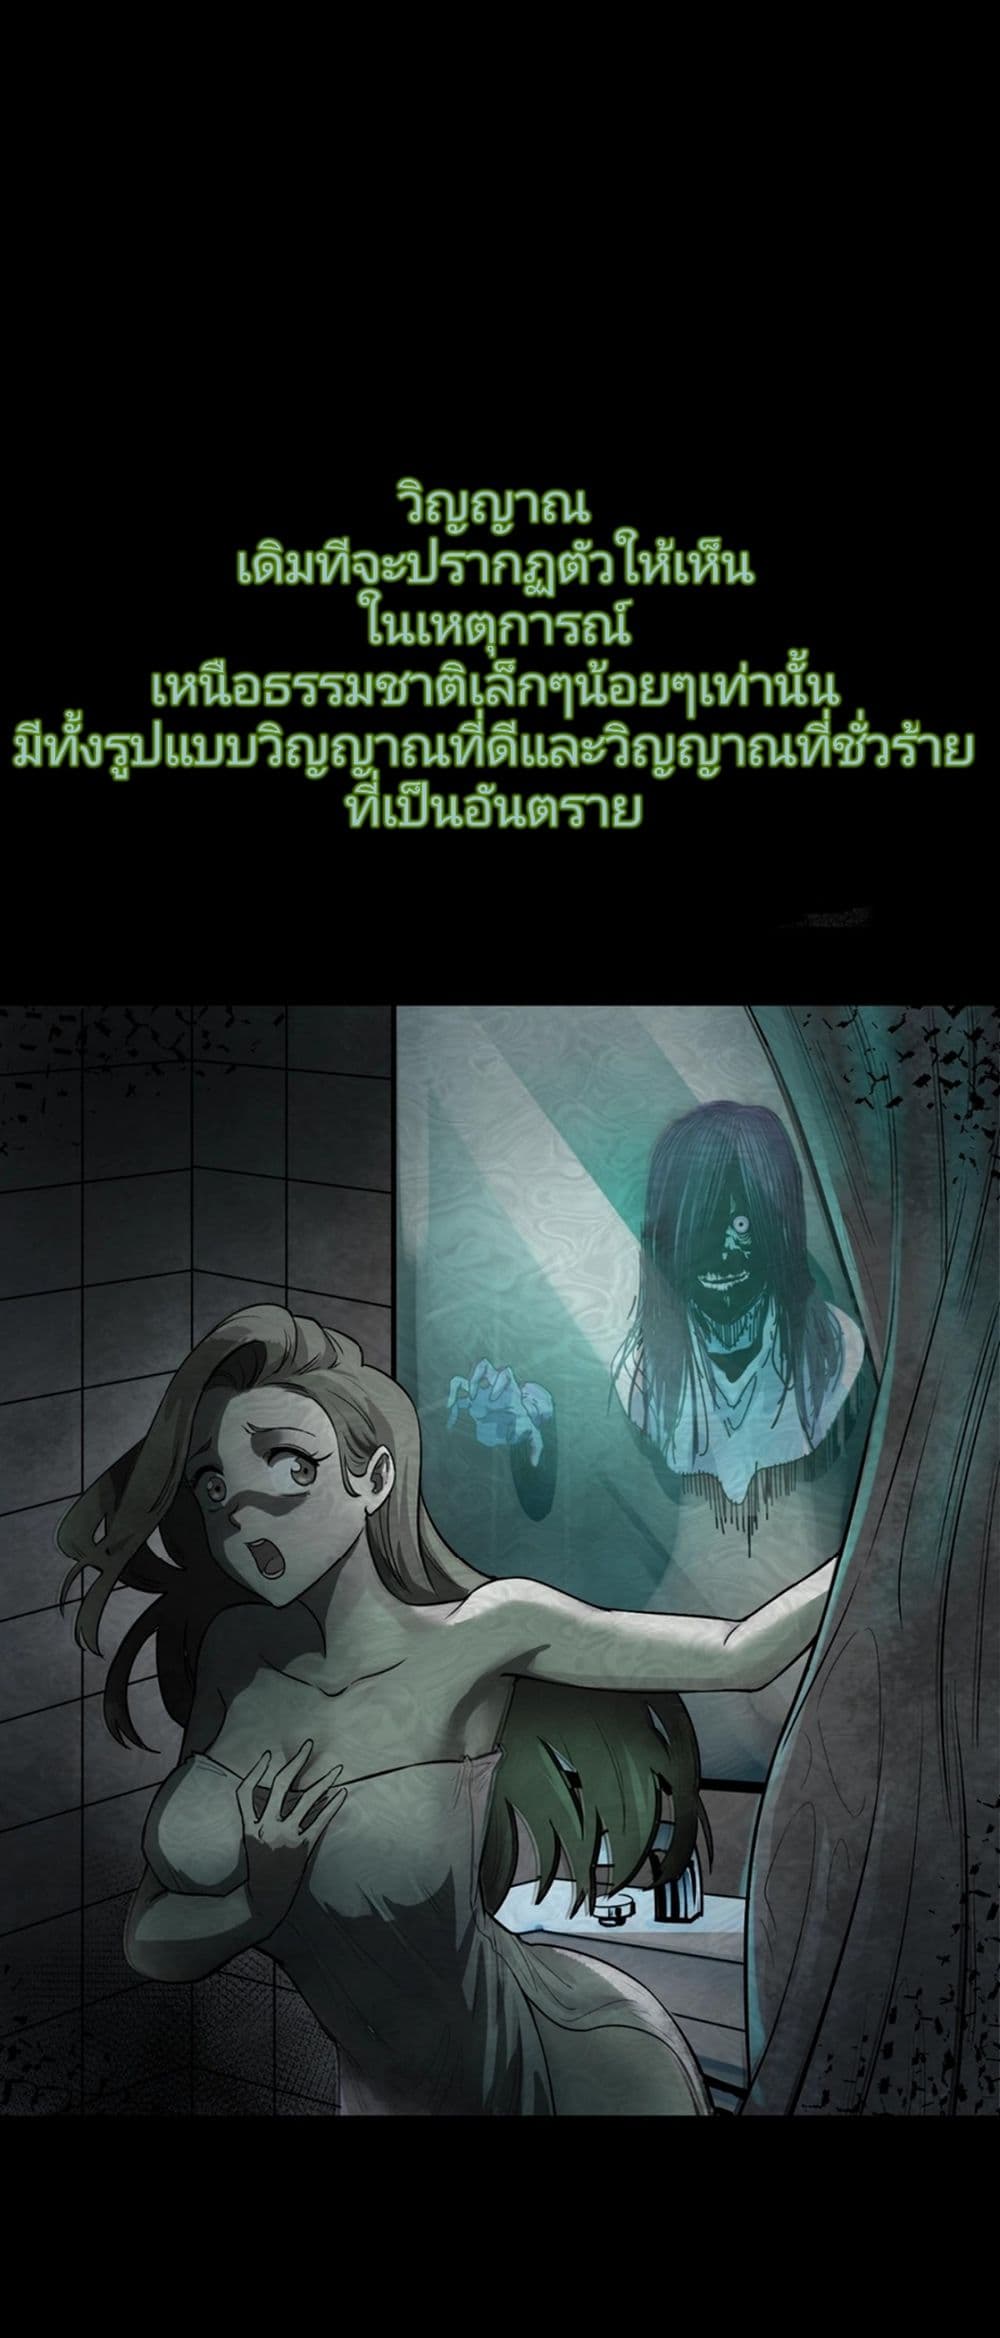 The Age of Ghost Spirits à¸à¸­à¸à¸à¸µà¹ 1 (2)